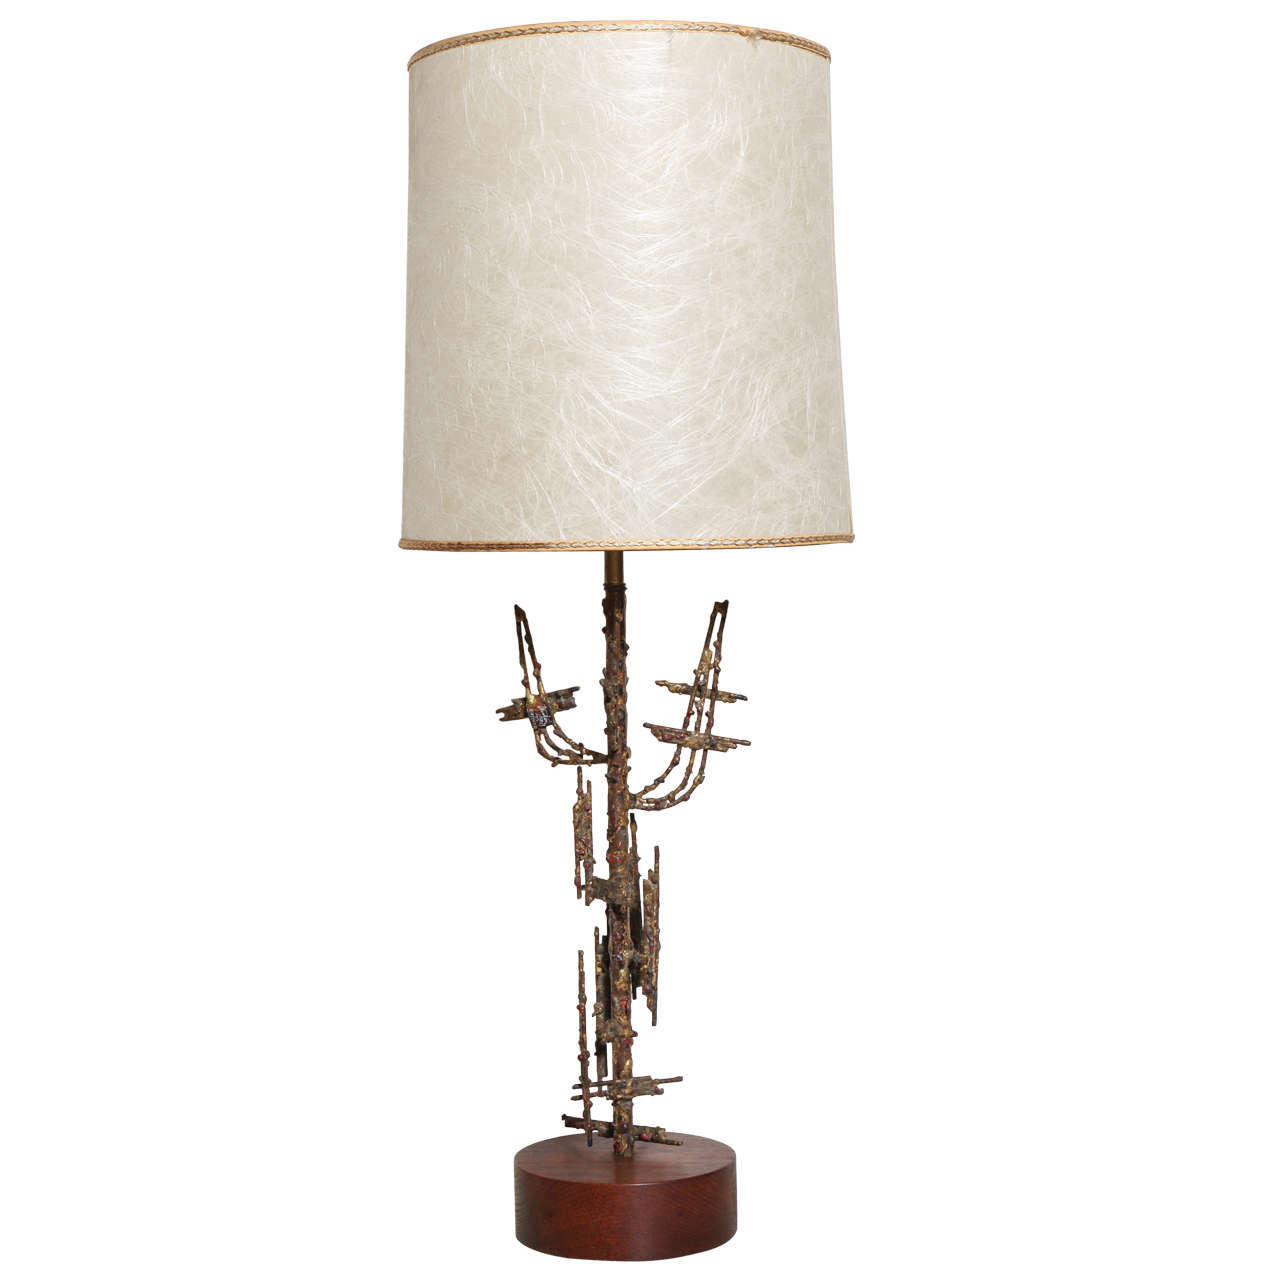 Tall Marcello Fantoni for Raymor "Bronzed Tree" Table Lamp, 1960s For Sale